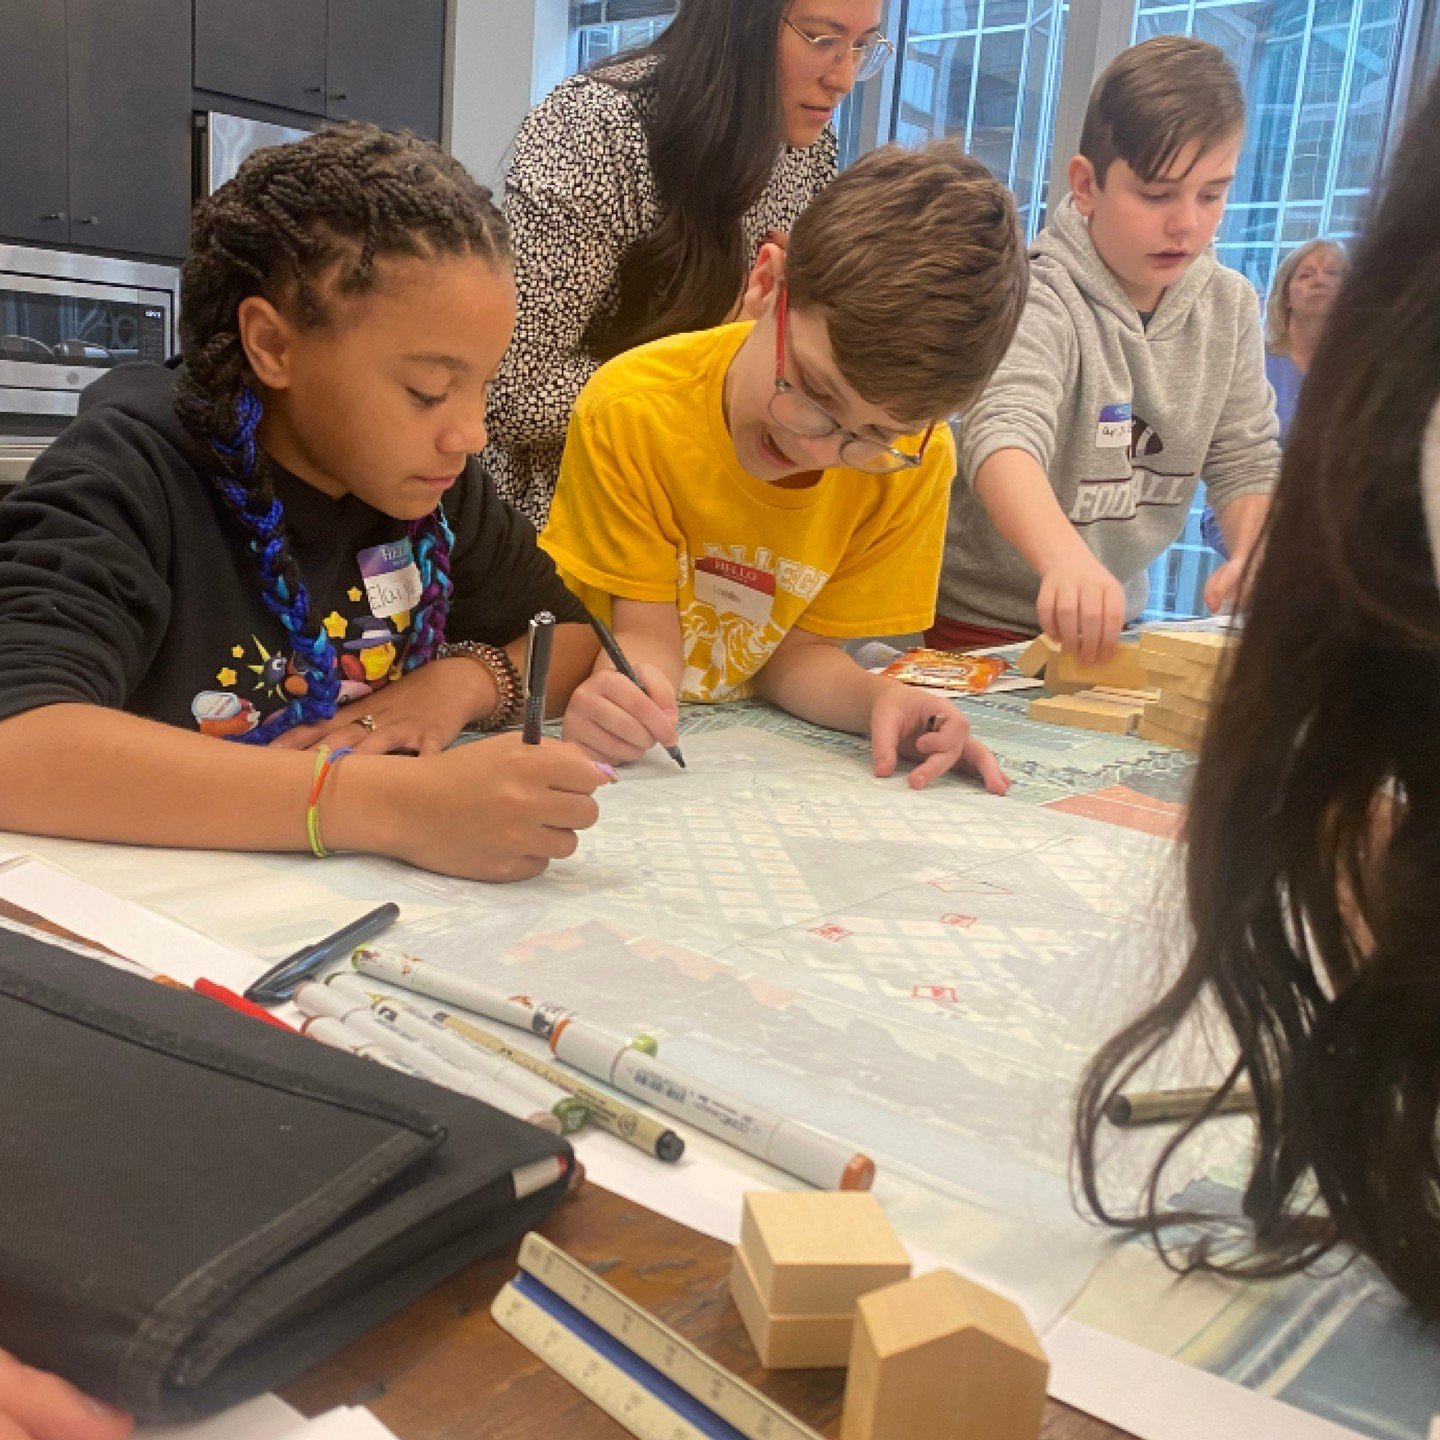 We were delighted to welcome elementary school students from The Consortium for Public Education program for a day of learning. We shared our inclusive process and facilitated a fun exercise to design urban blocks in Pittsburgh's Market Square.

@TCF